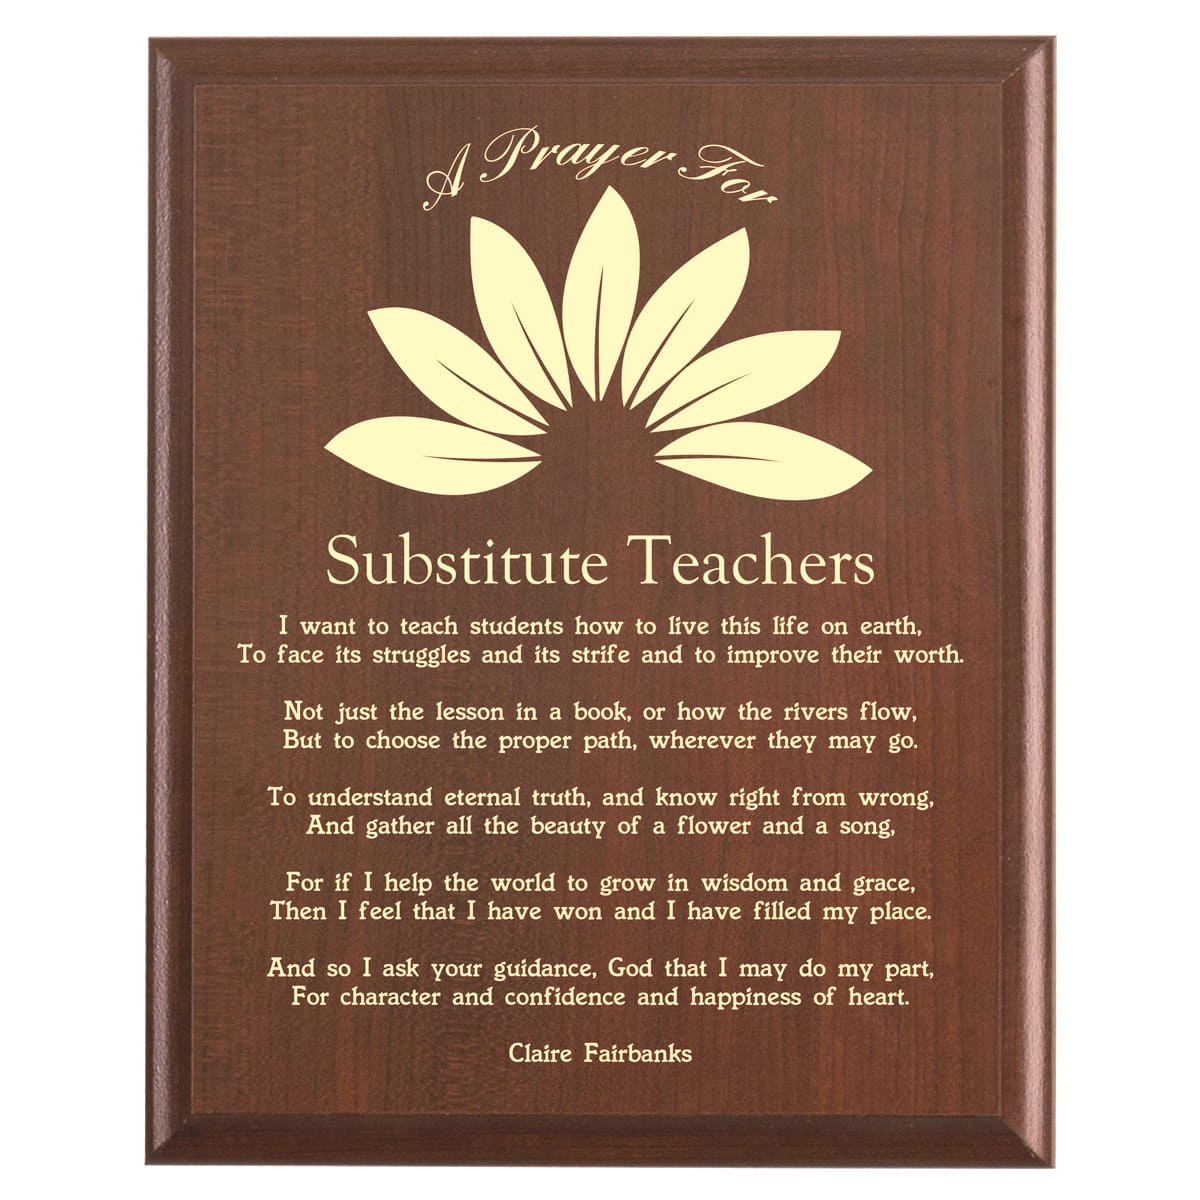 Plaque photo: Substitute Teacher Prayer Plaque design with free personalization. Wood style finish with customized text.